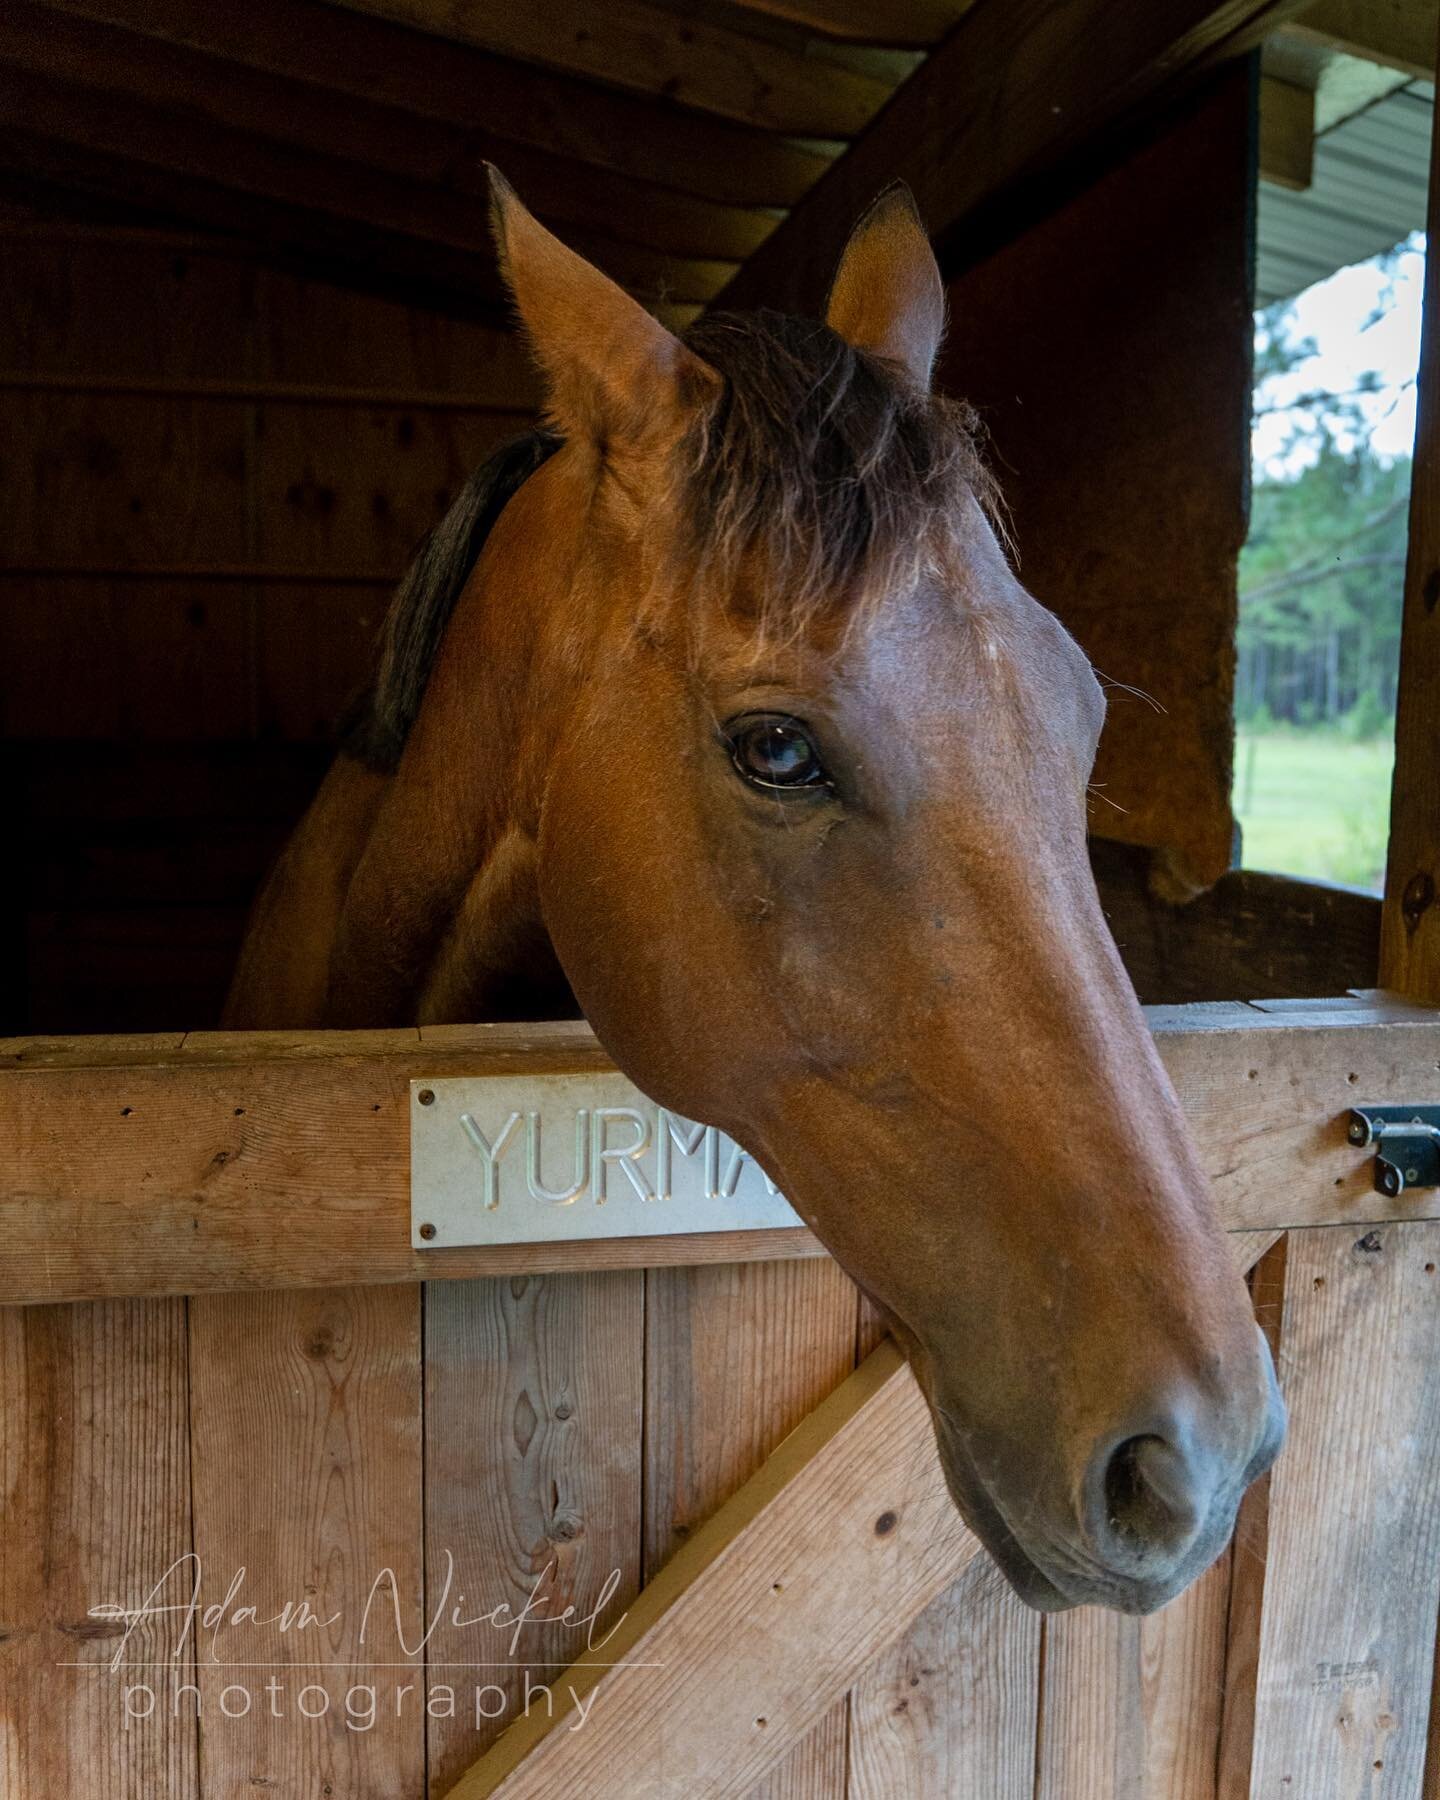 Meet Yurman, he&rsquo;s a horse and he too was at our @airbnb in #southcarolina. A lovely steed who loves oats and walking in the fields. #horse #horses #photography #photooftheday #photo #photographer #marylandphotographer